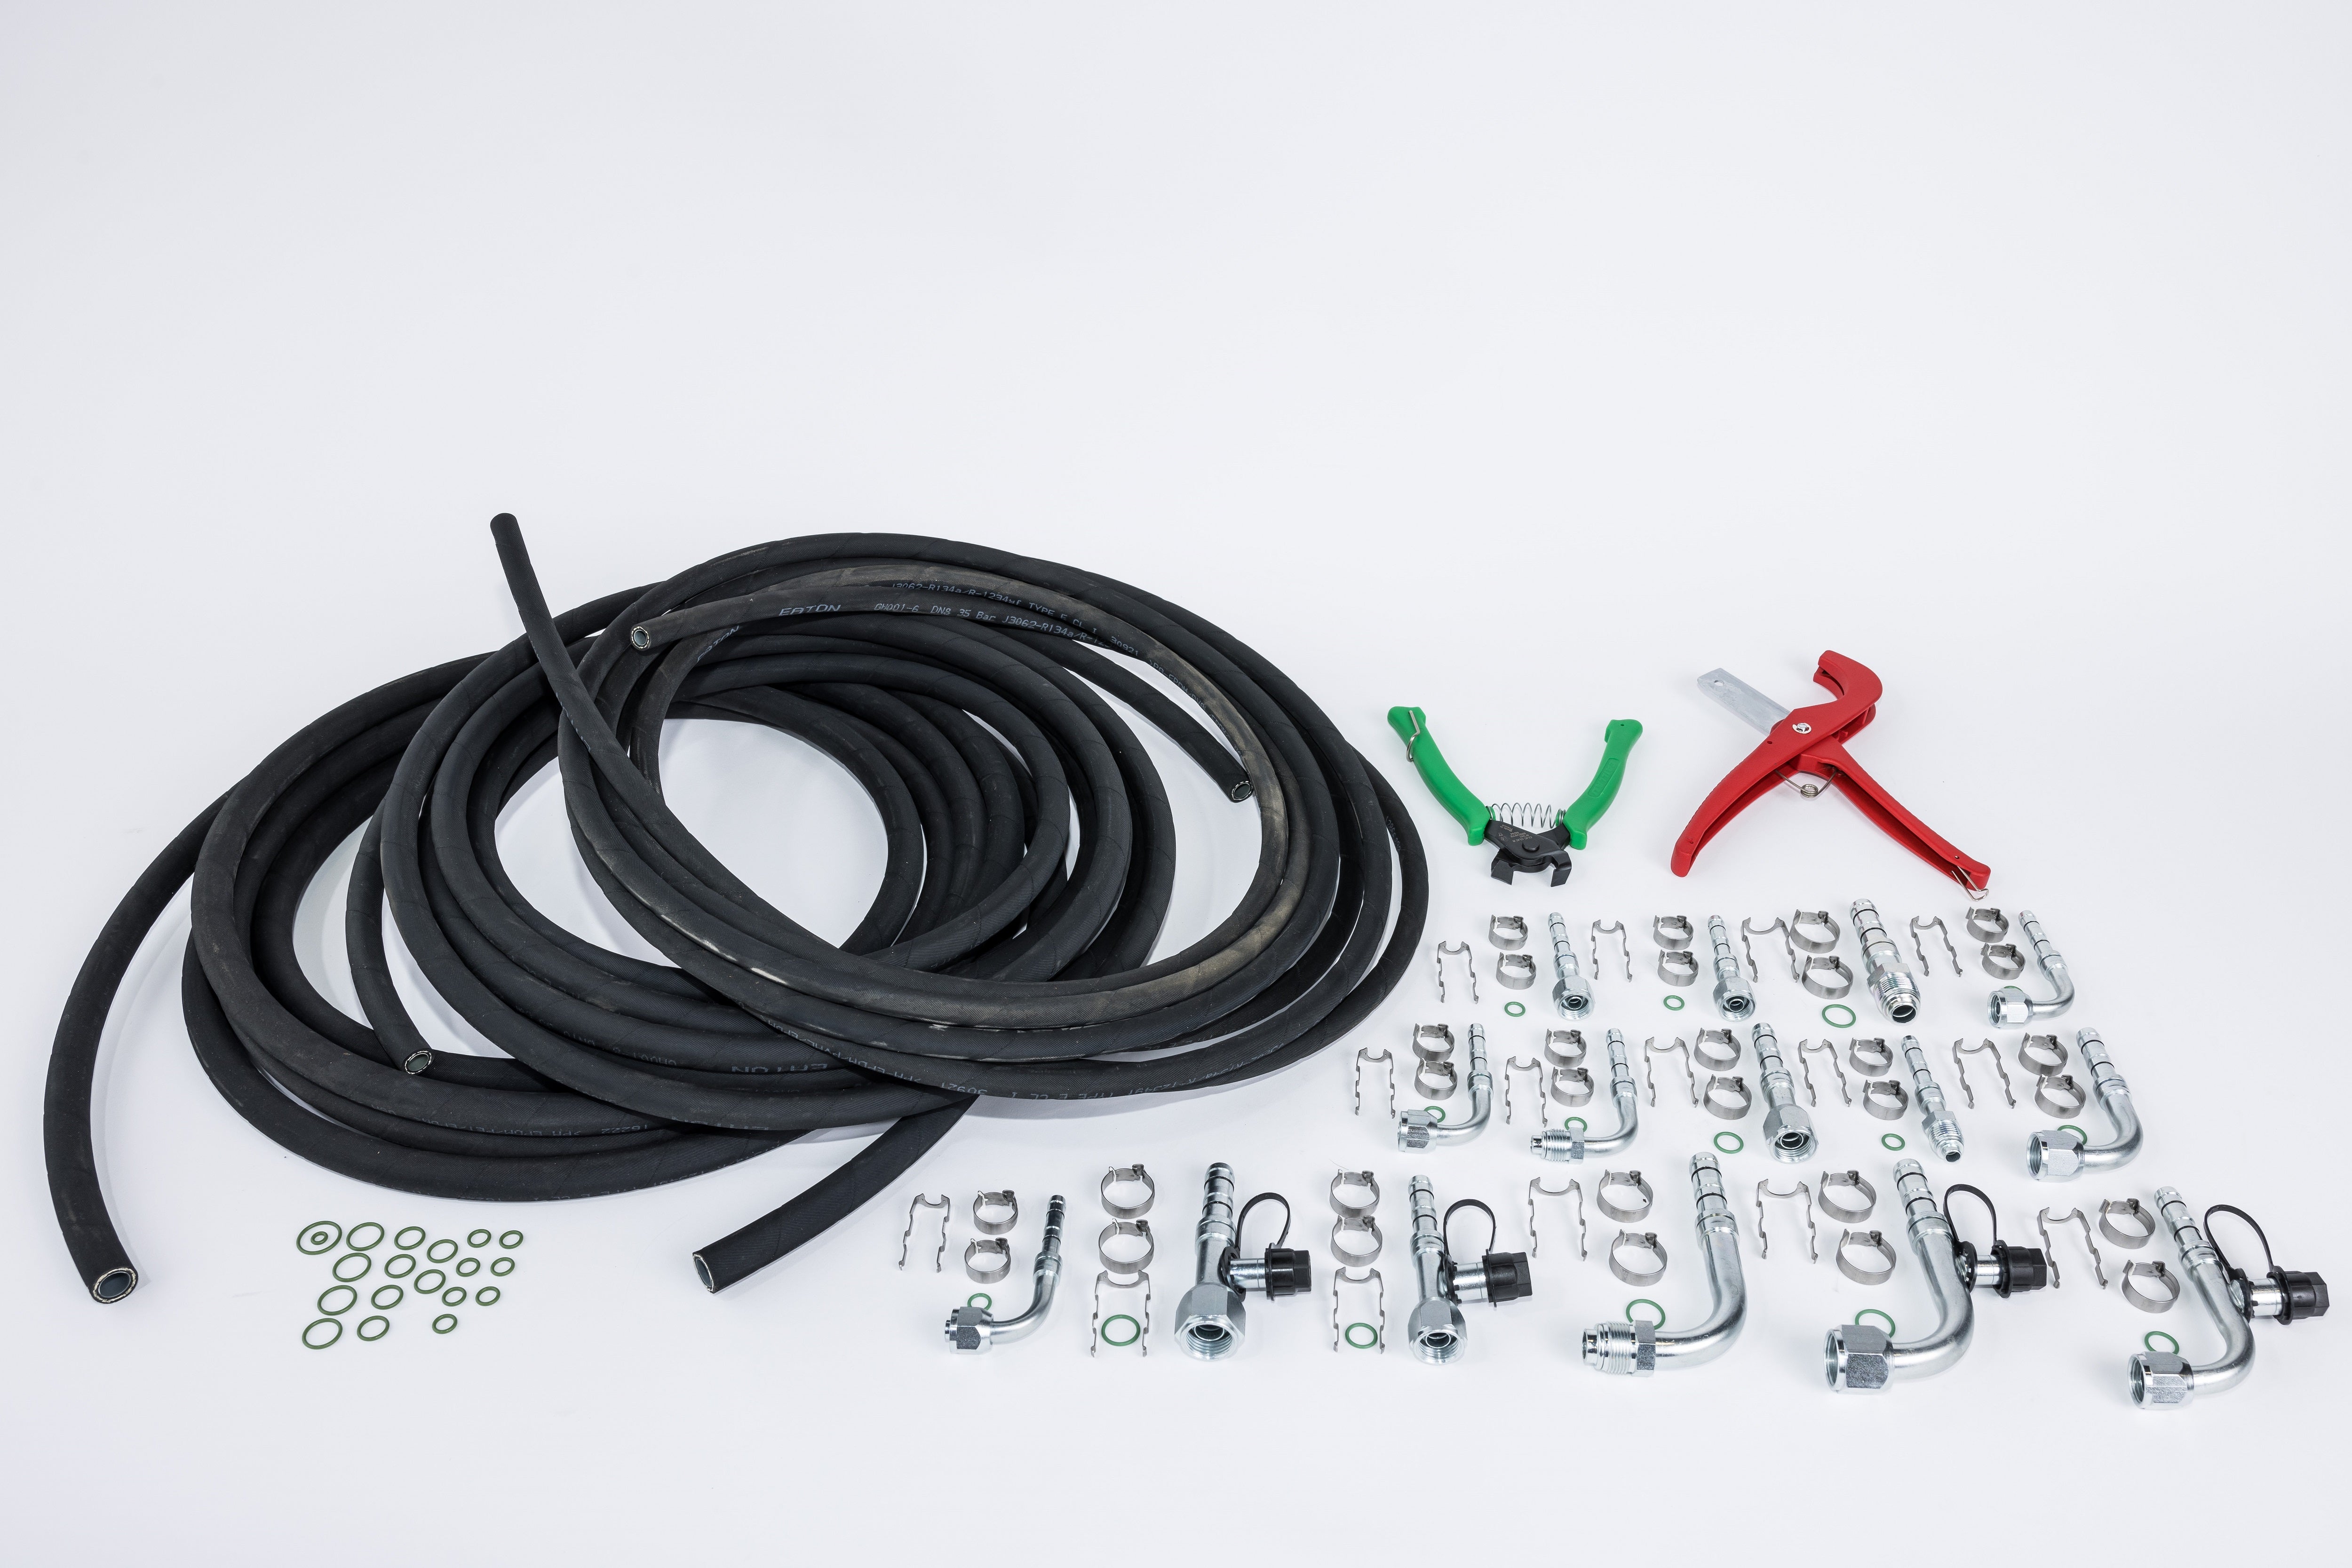 Ac Hose Kit For Universal Applications 10-7-0002 Units